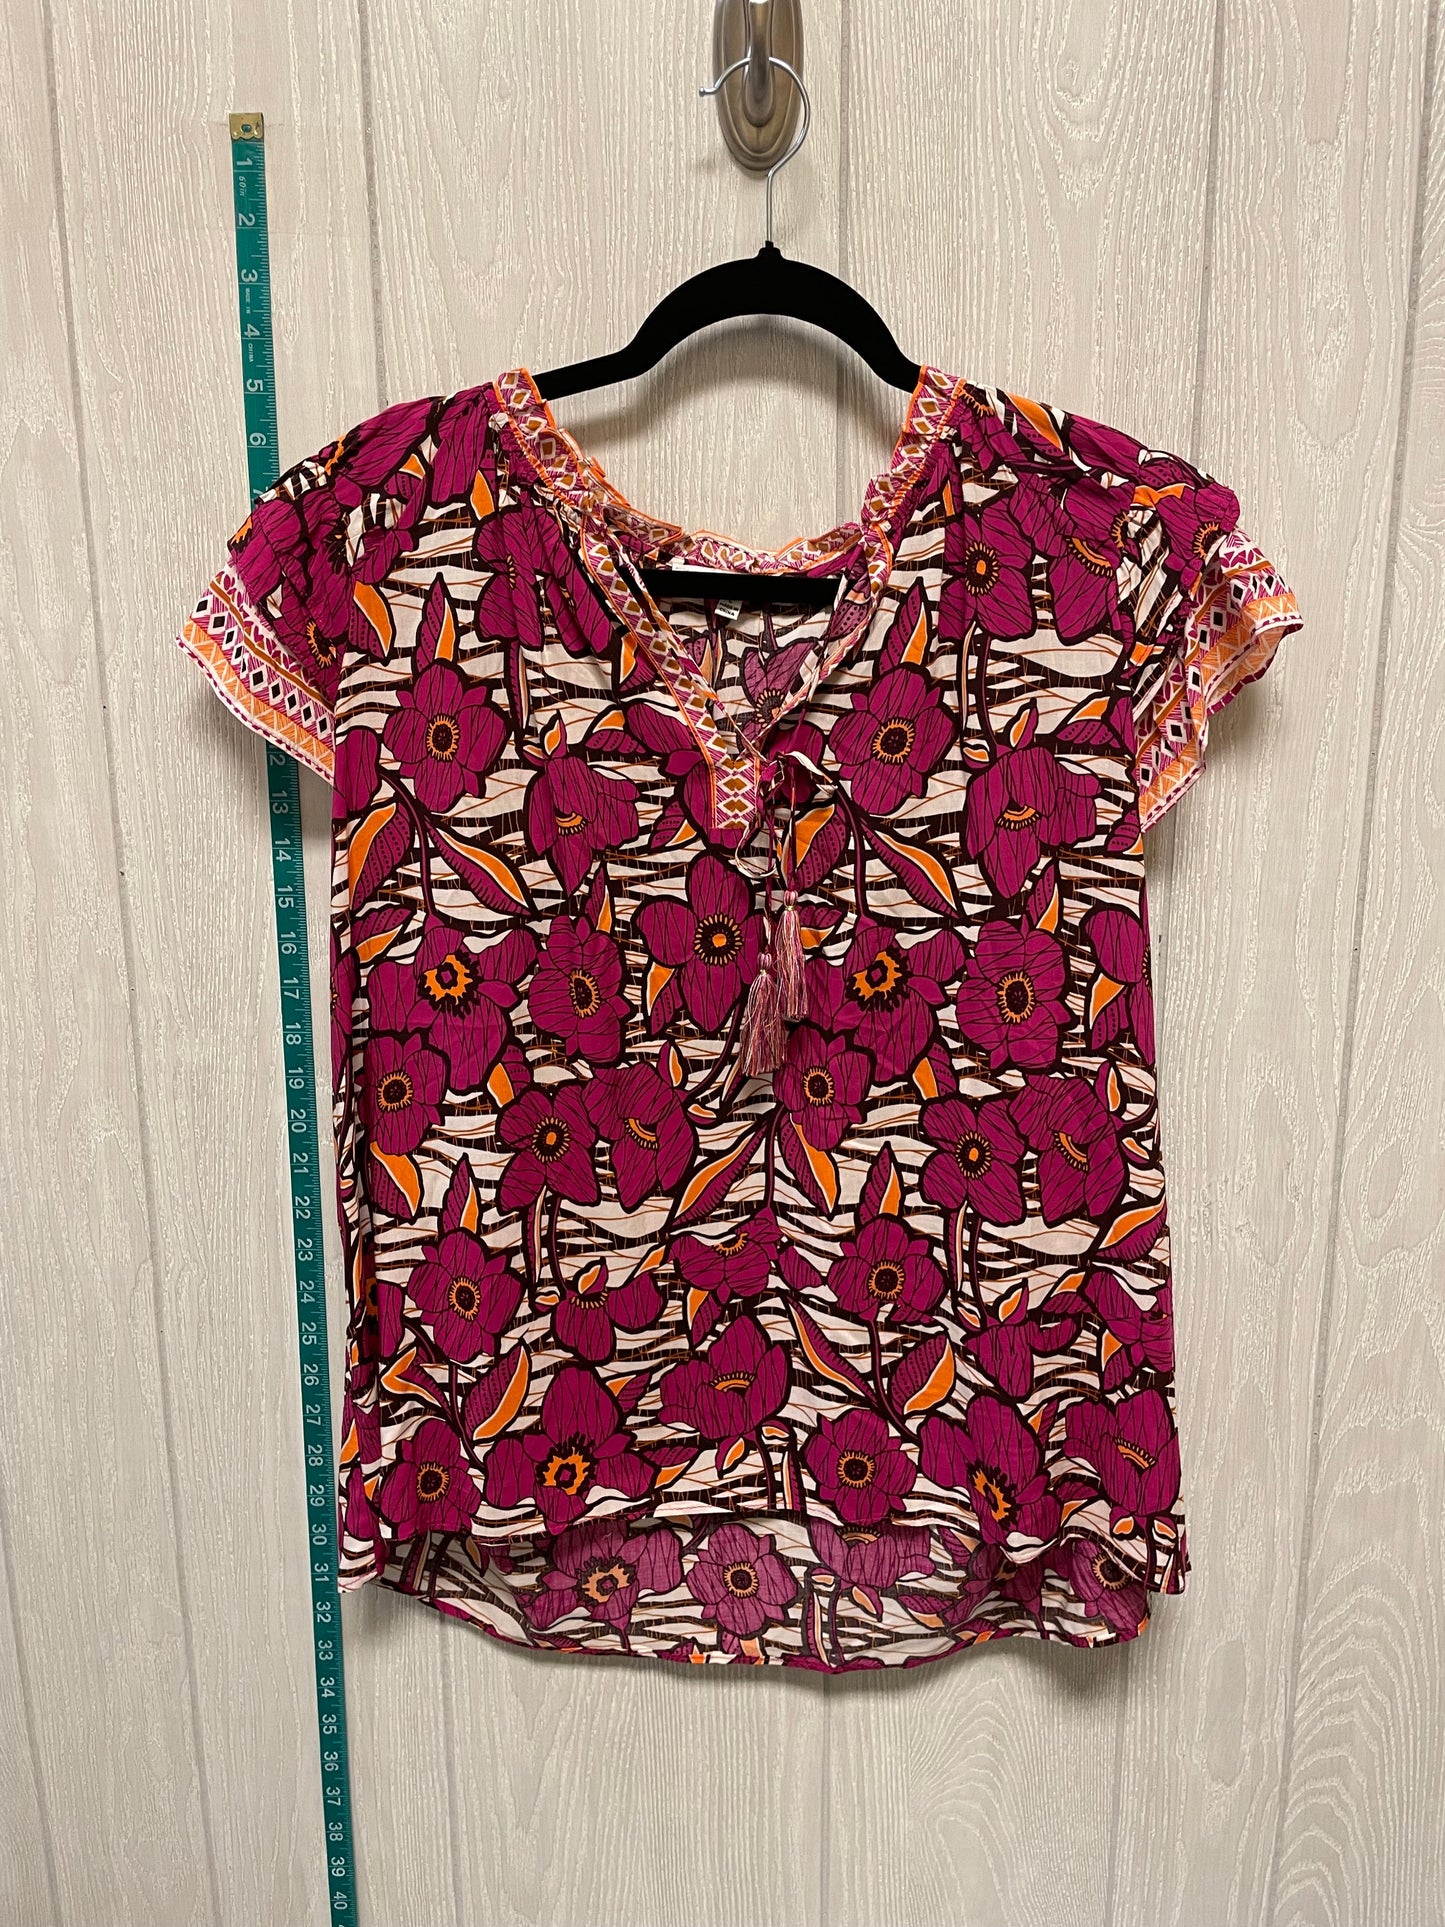 Top Short Sleeve By Rose And Olive  Size: L